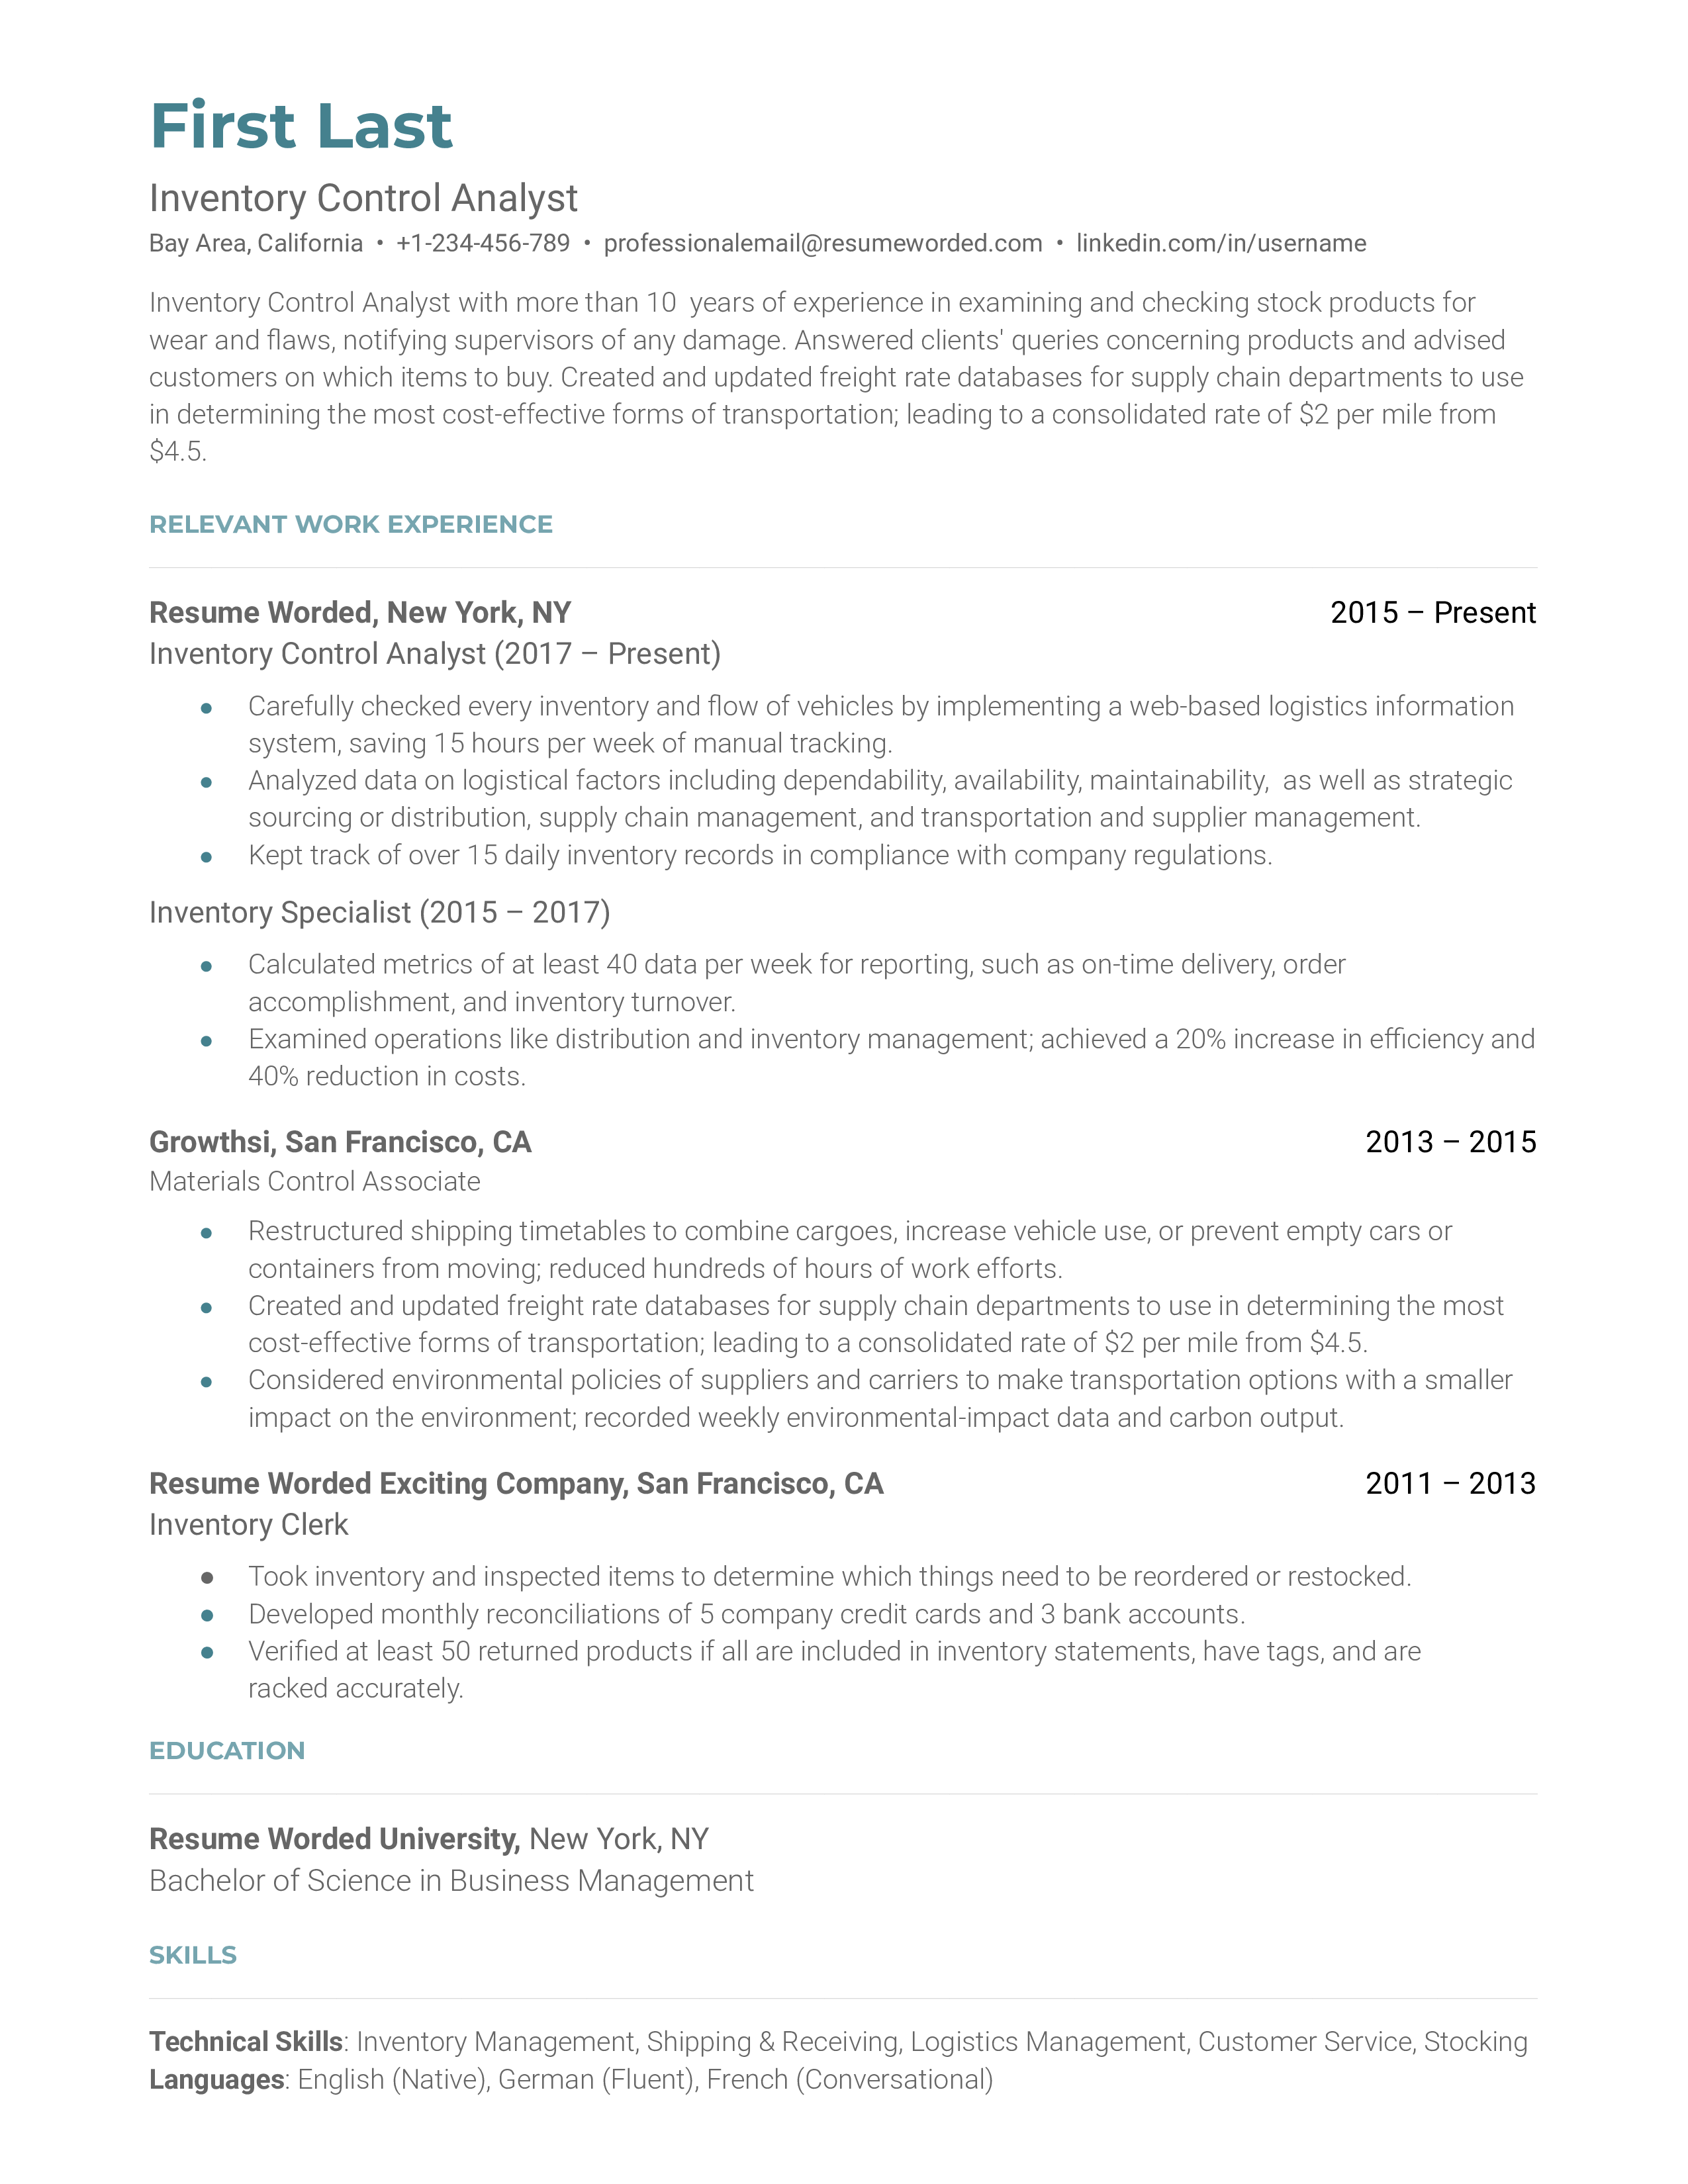 An Inventory Control Analyst's CV showcasing analytical skills and supply chain knowledge.